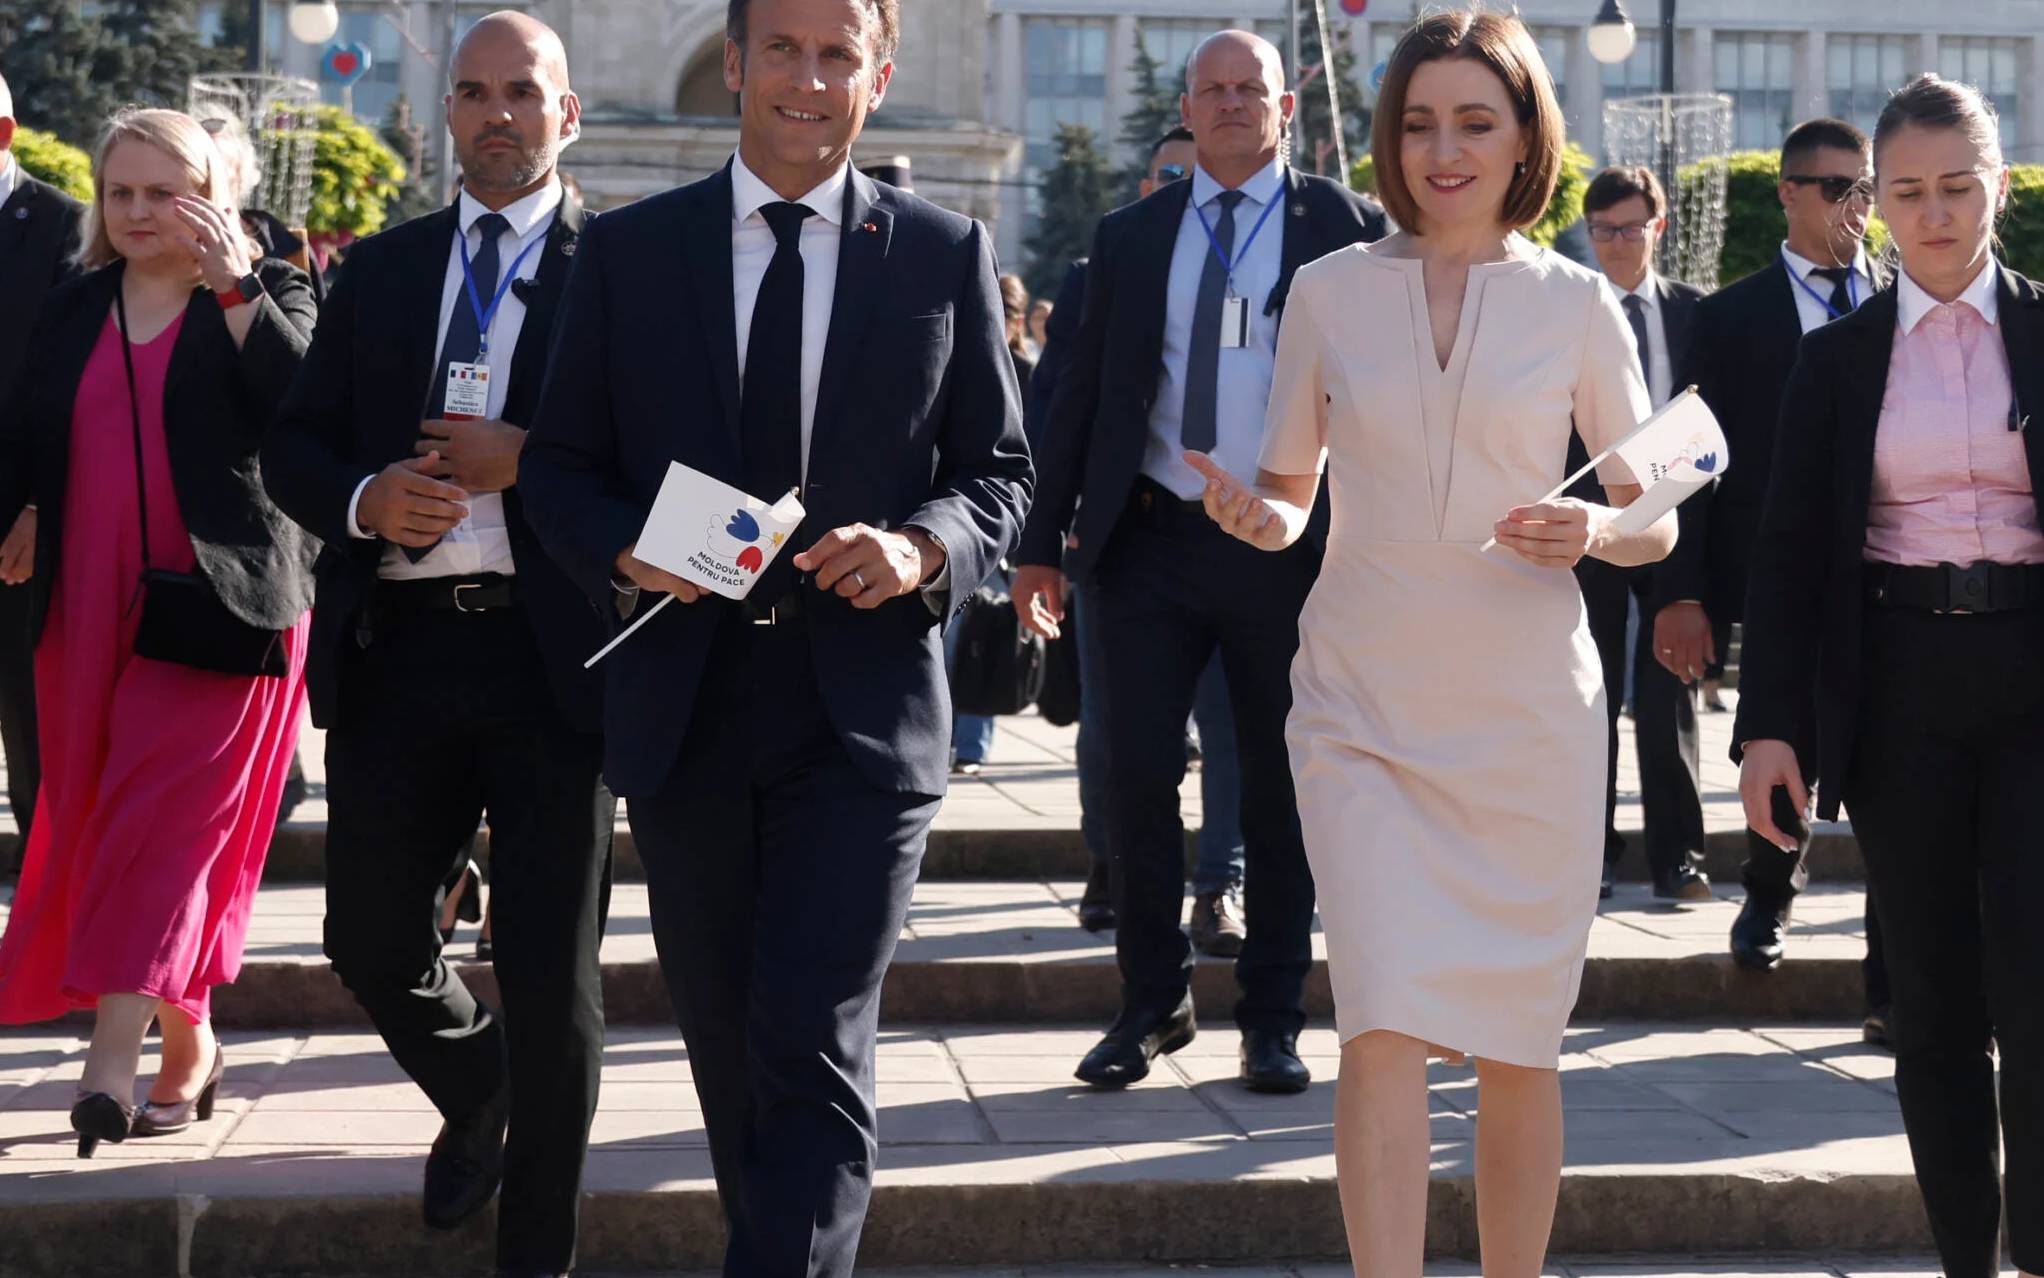 French President Emmanuel Macron and the President of Moldova Maia Sandu are seen during a walk-about following their meeting as part of Macron's official visit to the region, in Chisinau on June 15, 2022. - French President Emmanuel Macron (L) with President of Moldova Maia Sandu (R) during a walk-about following their meeting in Chisinau, Moldova, 15 June 2022. (Photo by Yoan VALAT / POOL / AFP)